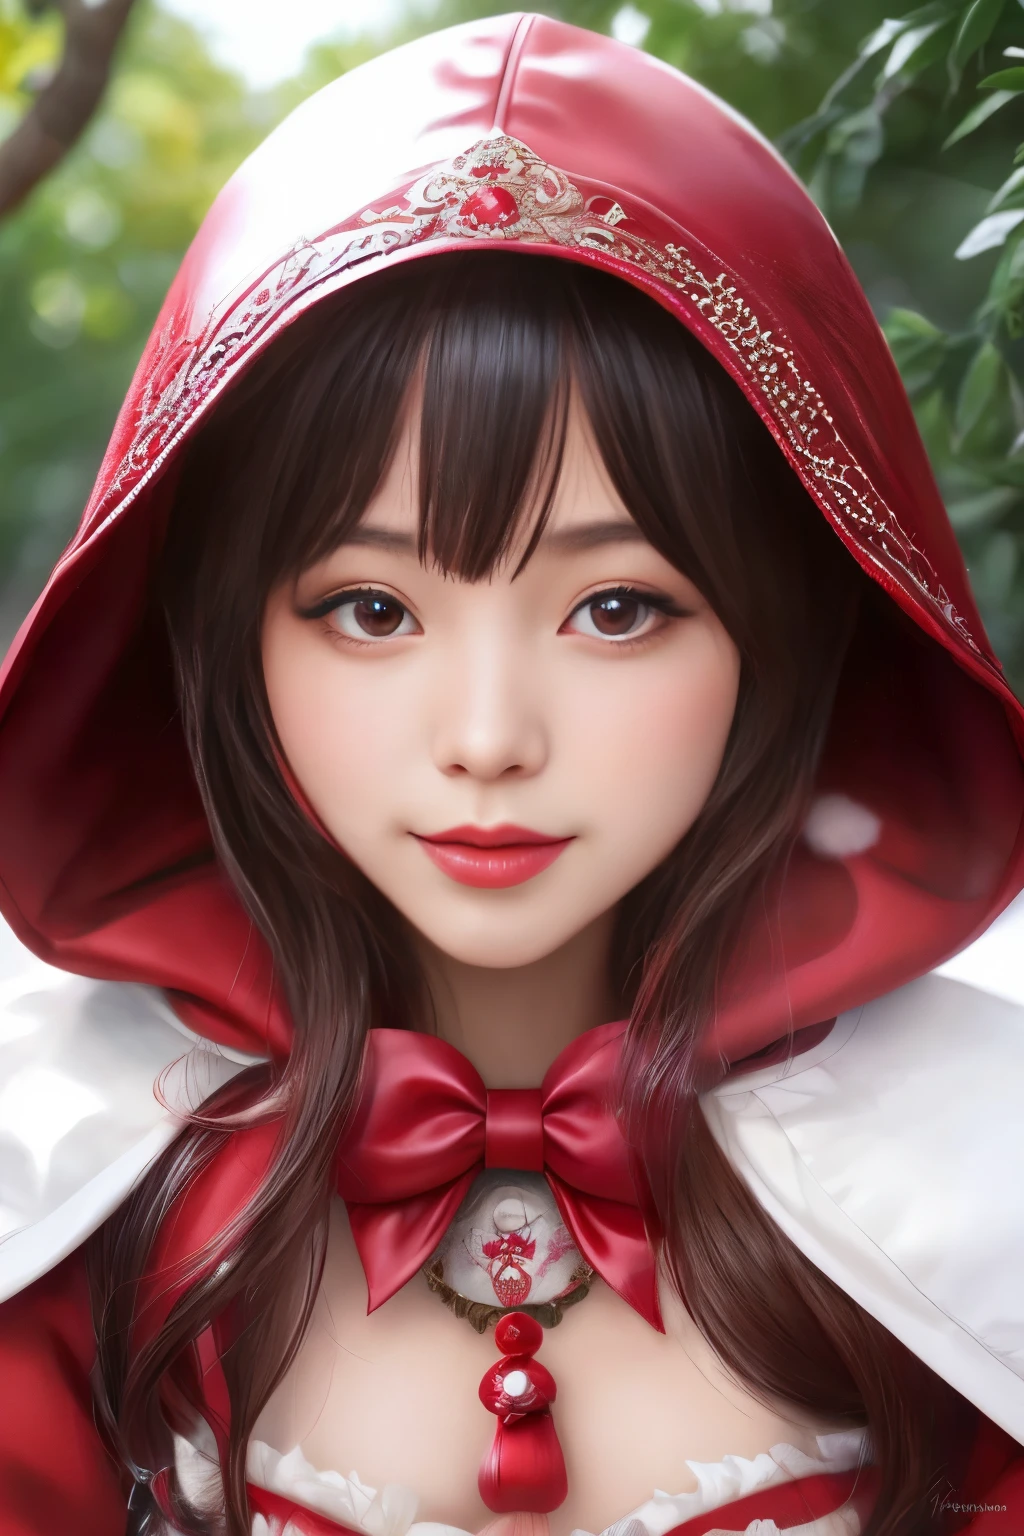 Hyper-realistic portrait oF a Japanese girl dressed as Ruby, Rotkäppchen, intricate and detailed red and white outFit, Nahaufnahme, shallow depth oF Field, soFt natural lighting, Hohe Auflösung, Genaue Darstellung, einzigartig, kreativ, gut beleuchtet, klare Angaben, Canon EOS R5, 100mm lens, F/1.8, elegant, charmant, Anspruchsvoll, gut komponiert